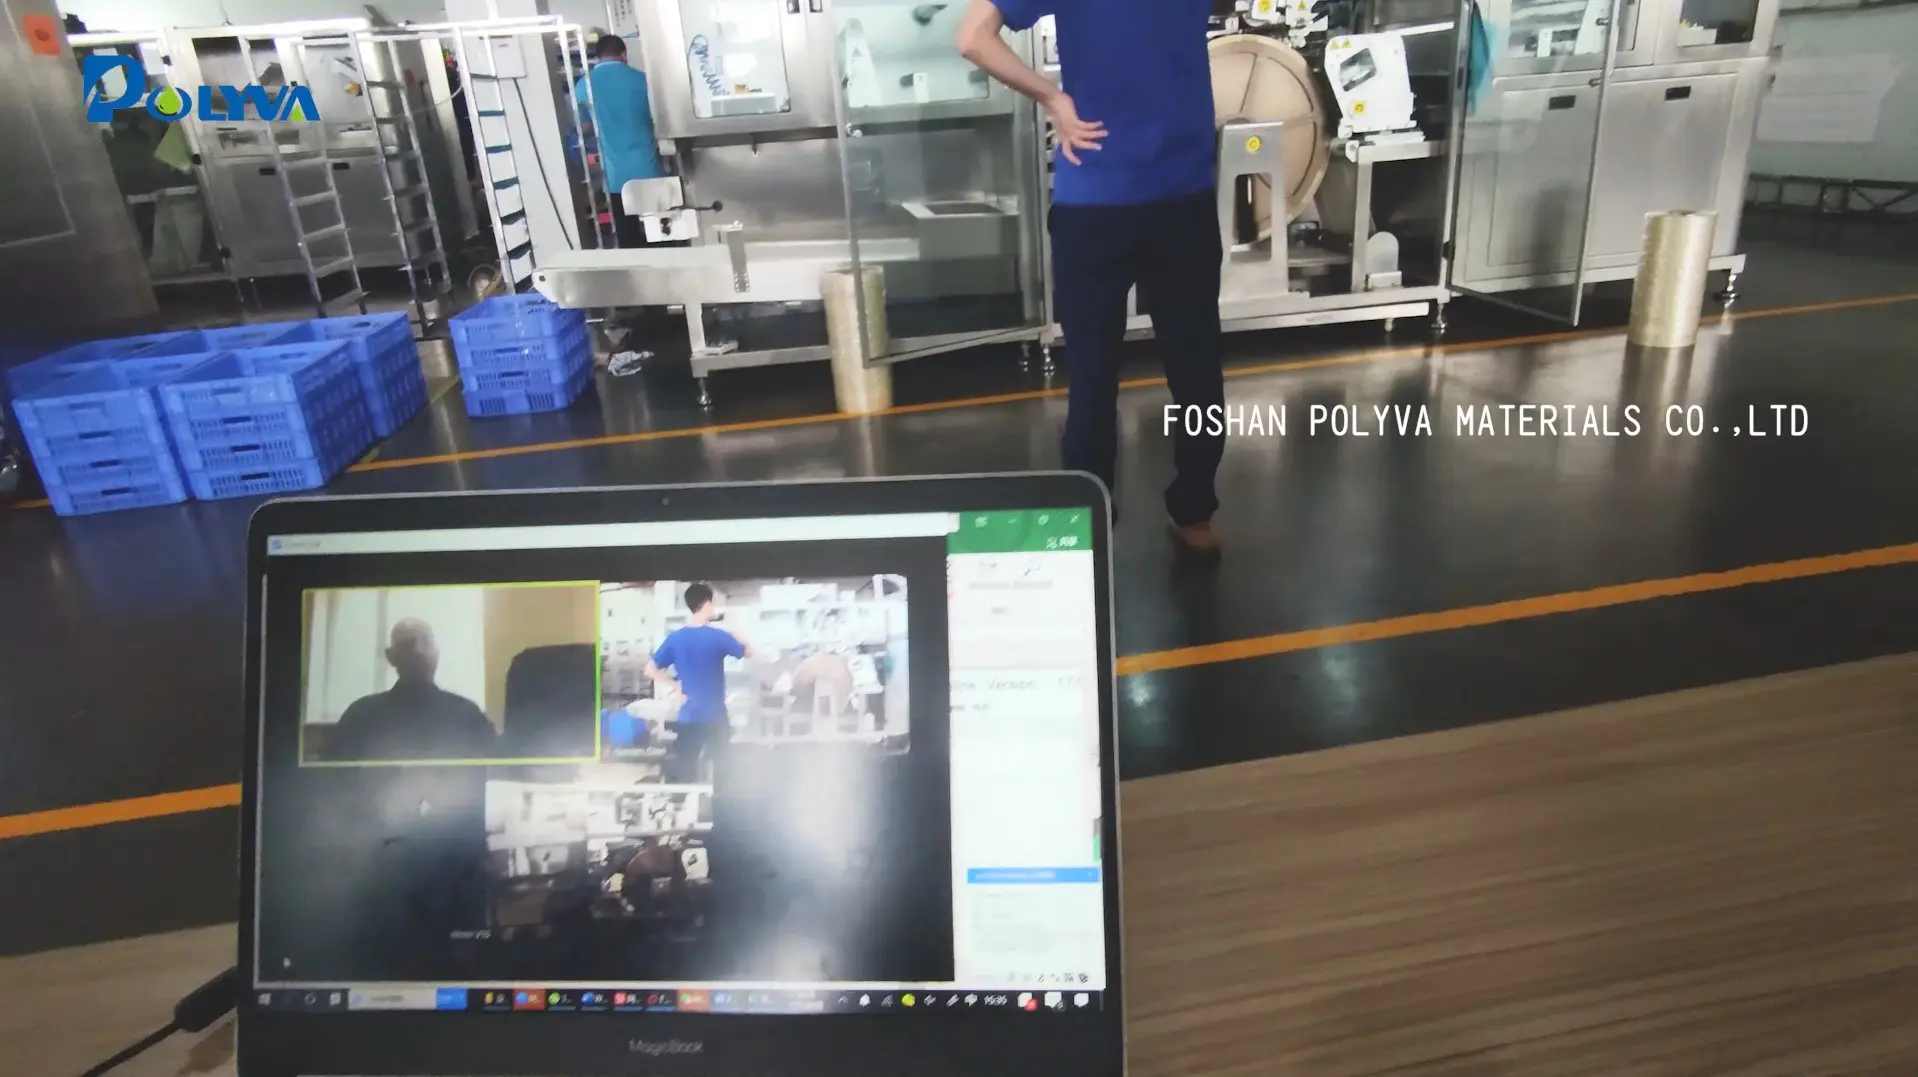 Polyva's foreign customers inspection and acceptance of the laundry detergent pods packaging machine by the live broadcast.